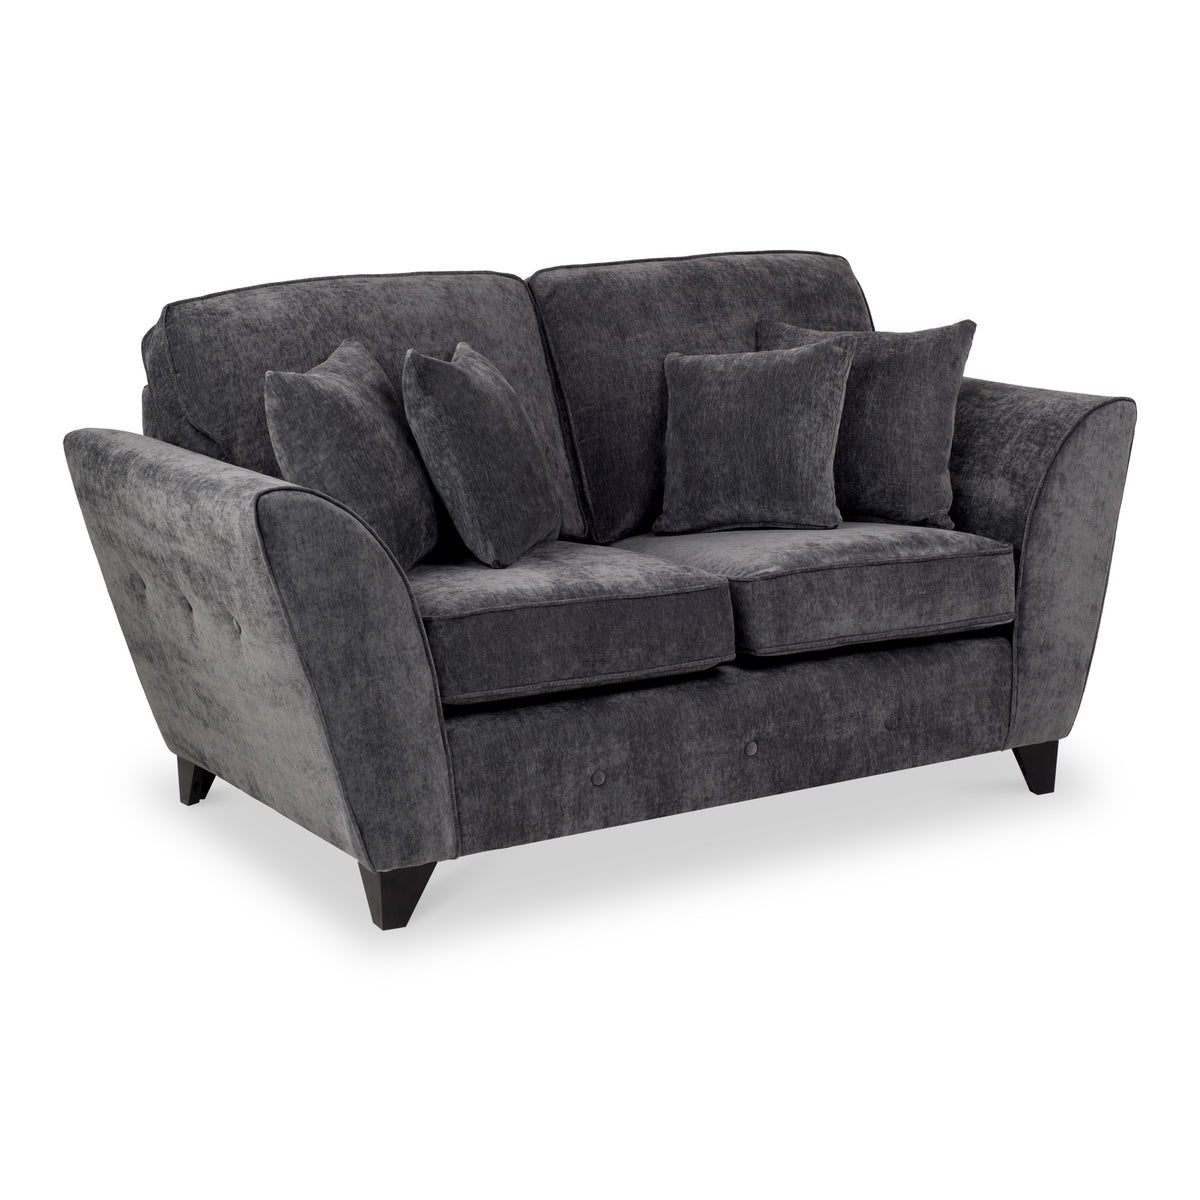 Harris 2 Seater Sofa in Charcoal by Roseland Furniture